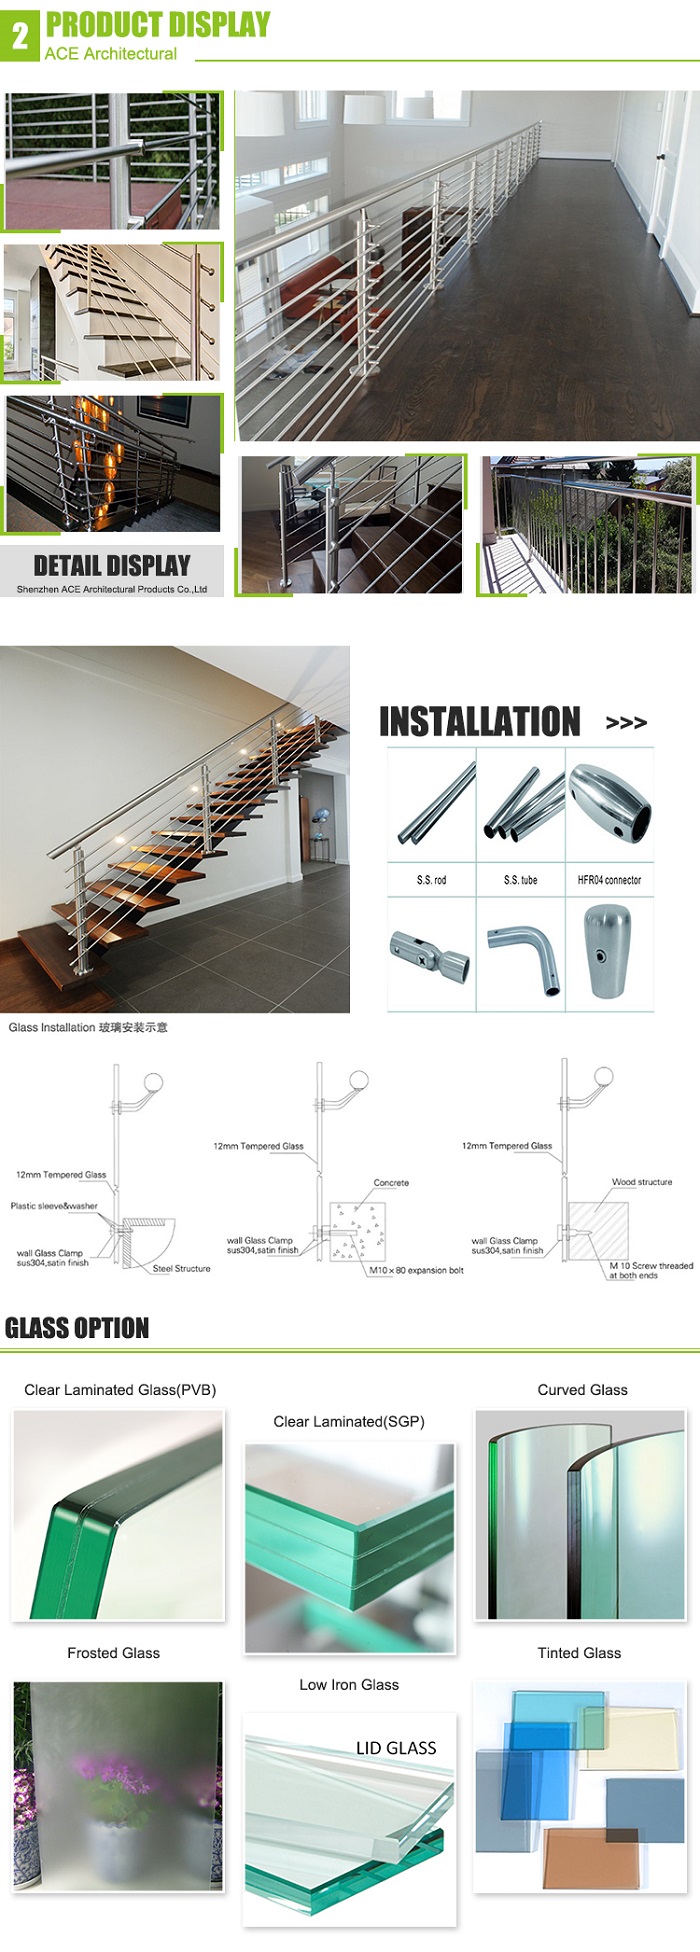 SS316 metal handrails for decks with 8mm solid rod bar design